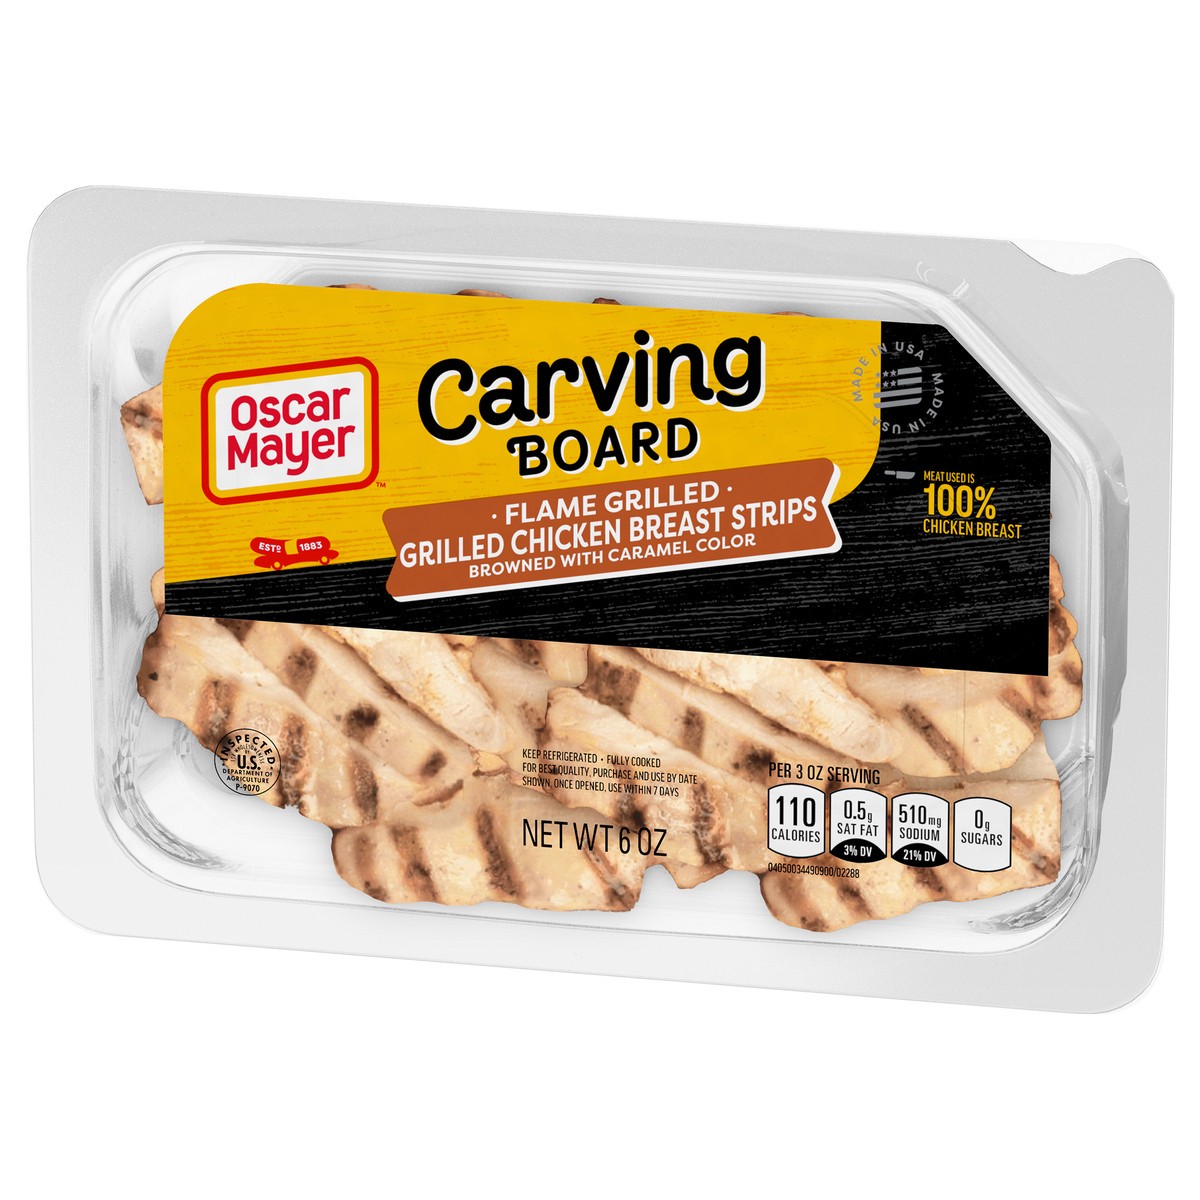 slide 3 of 9, Oscar Mayer Carving Board Flame Grilled Chicken Breast Strips Lunch Meat, 6 oz. Tray, 6 oz